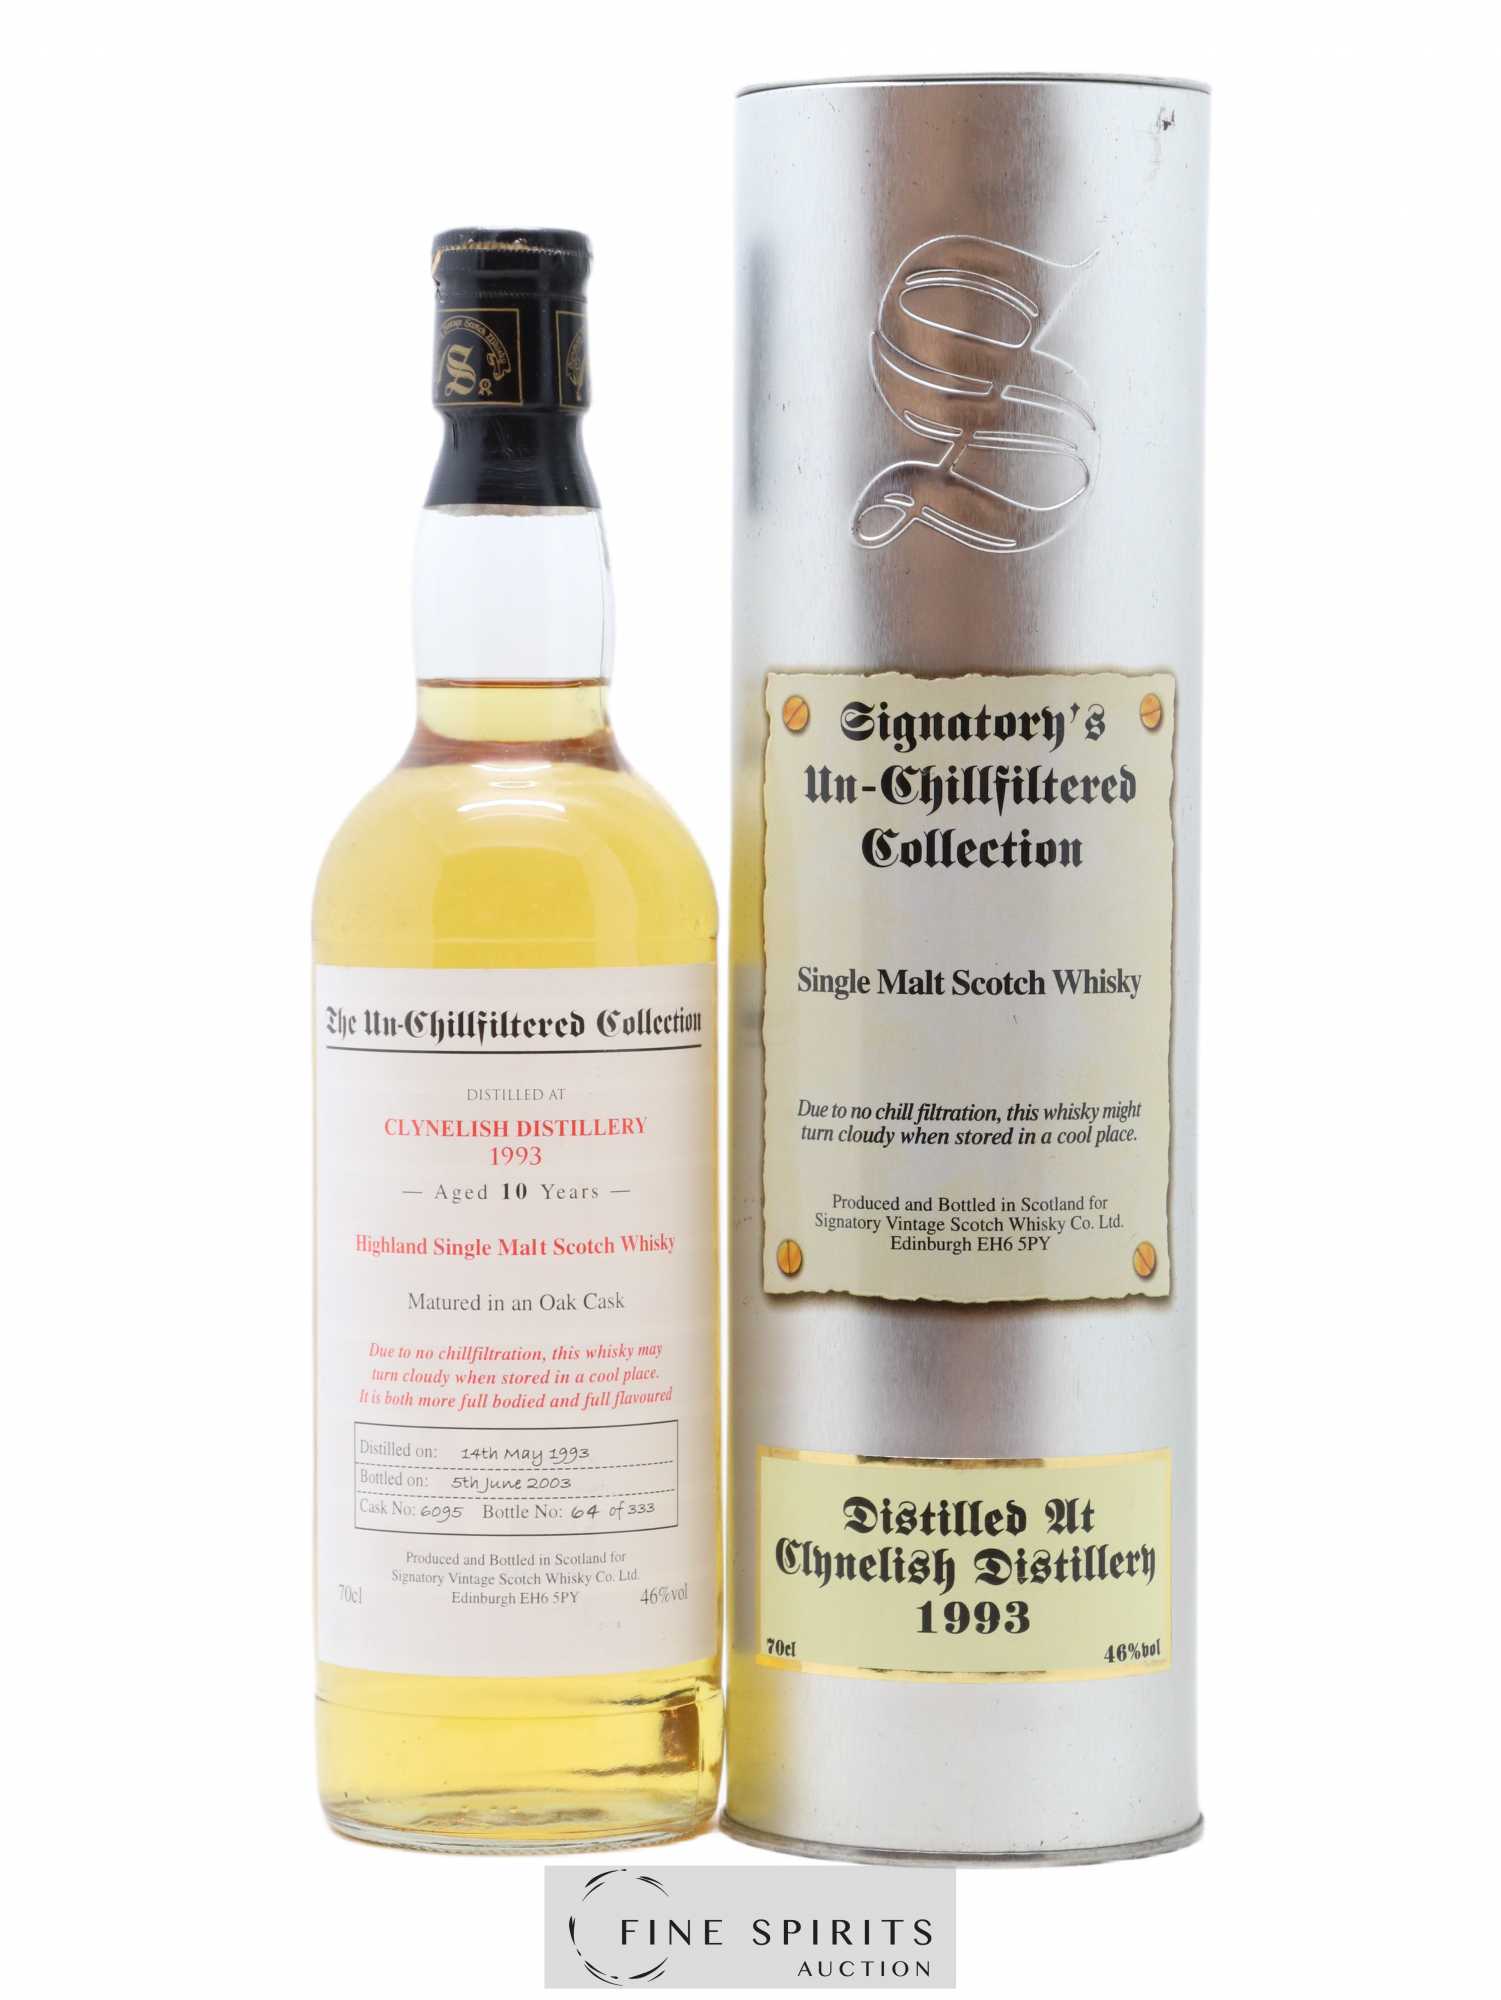 Clynelish 10 years 1993 Signatory Vintage Oak Cask n°6095 - One of 333 - bottled 2003 The Un-Chillfiltered Collection 